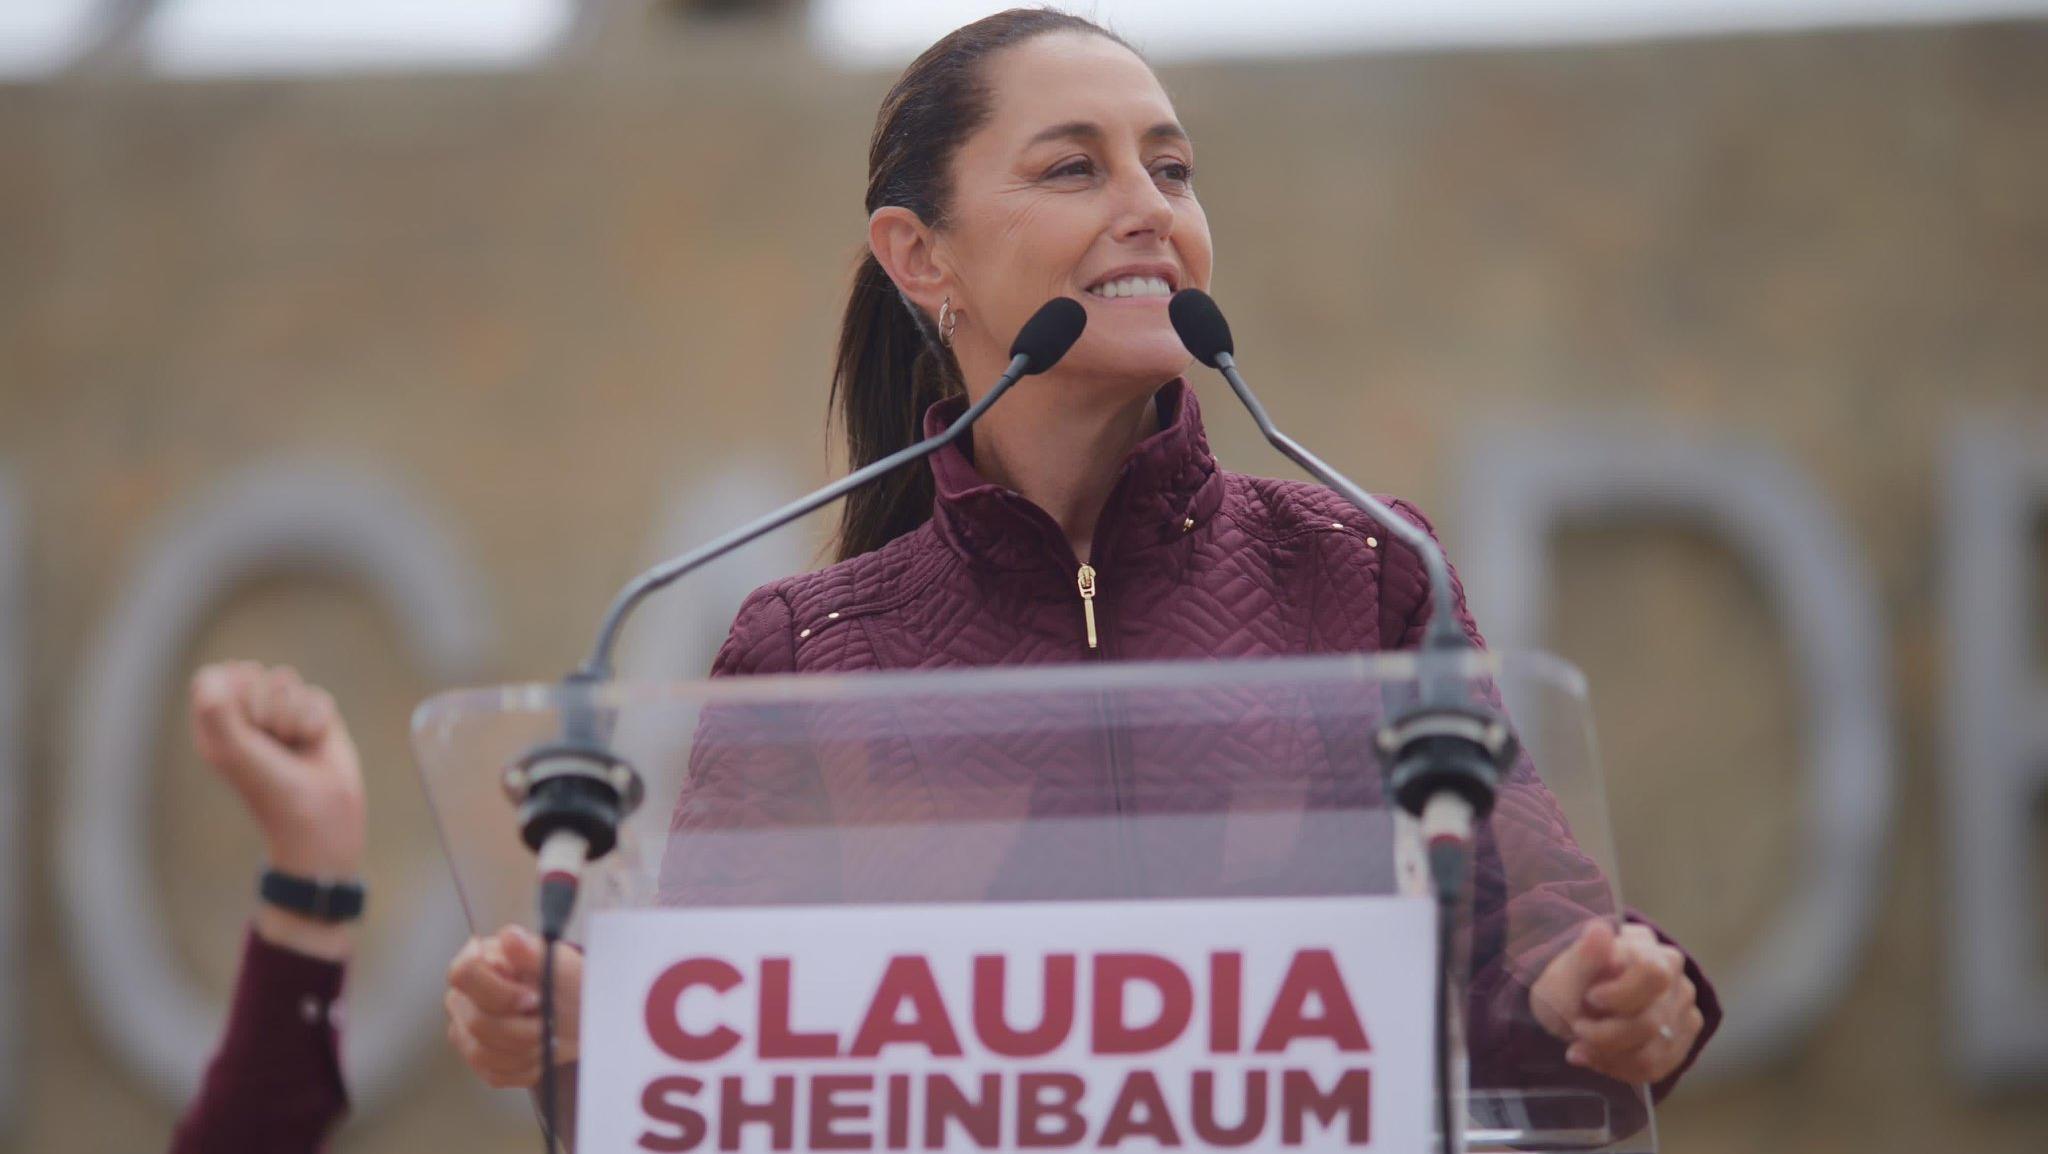 Sheinbaum leads the polls for the next June, 2 presidential elections.